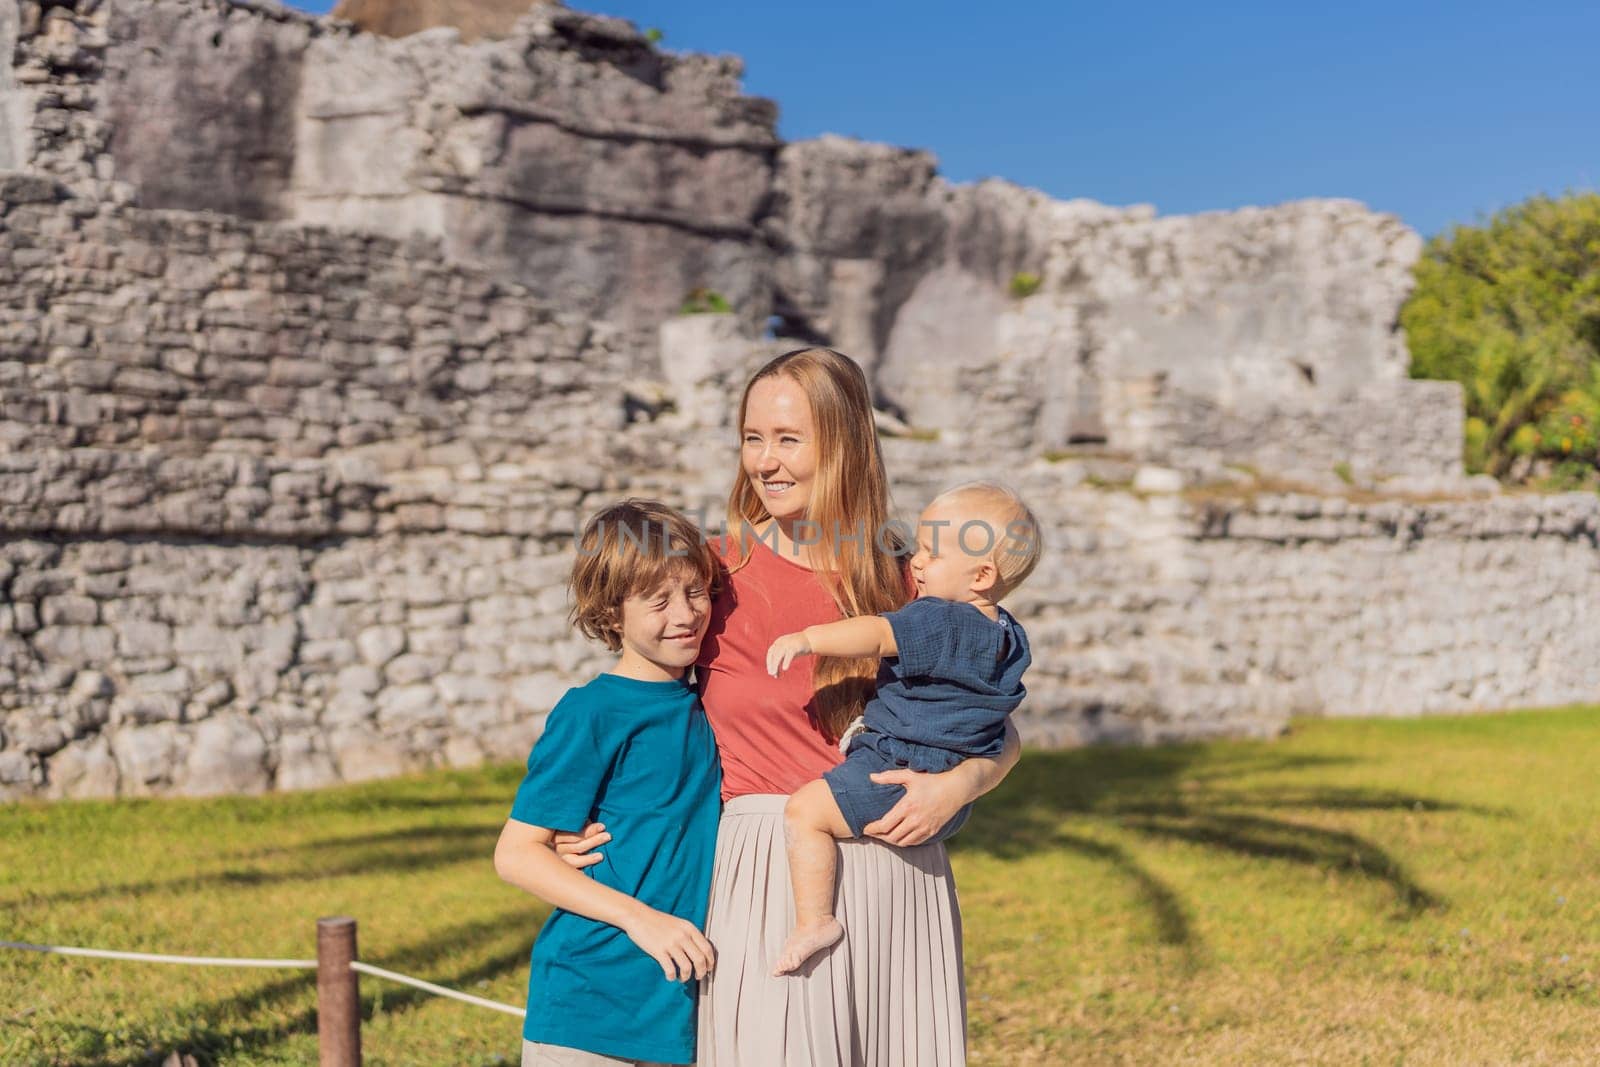 Mother and two sons tourists enjoying the view Pre-Columbian Mayan walled city of Tulum, Quintana Roo, Mexico, North America, Tulum, Mexico. El Castillo - castle the Mayan city of Tulum main temple by galitskaya